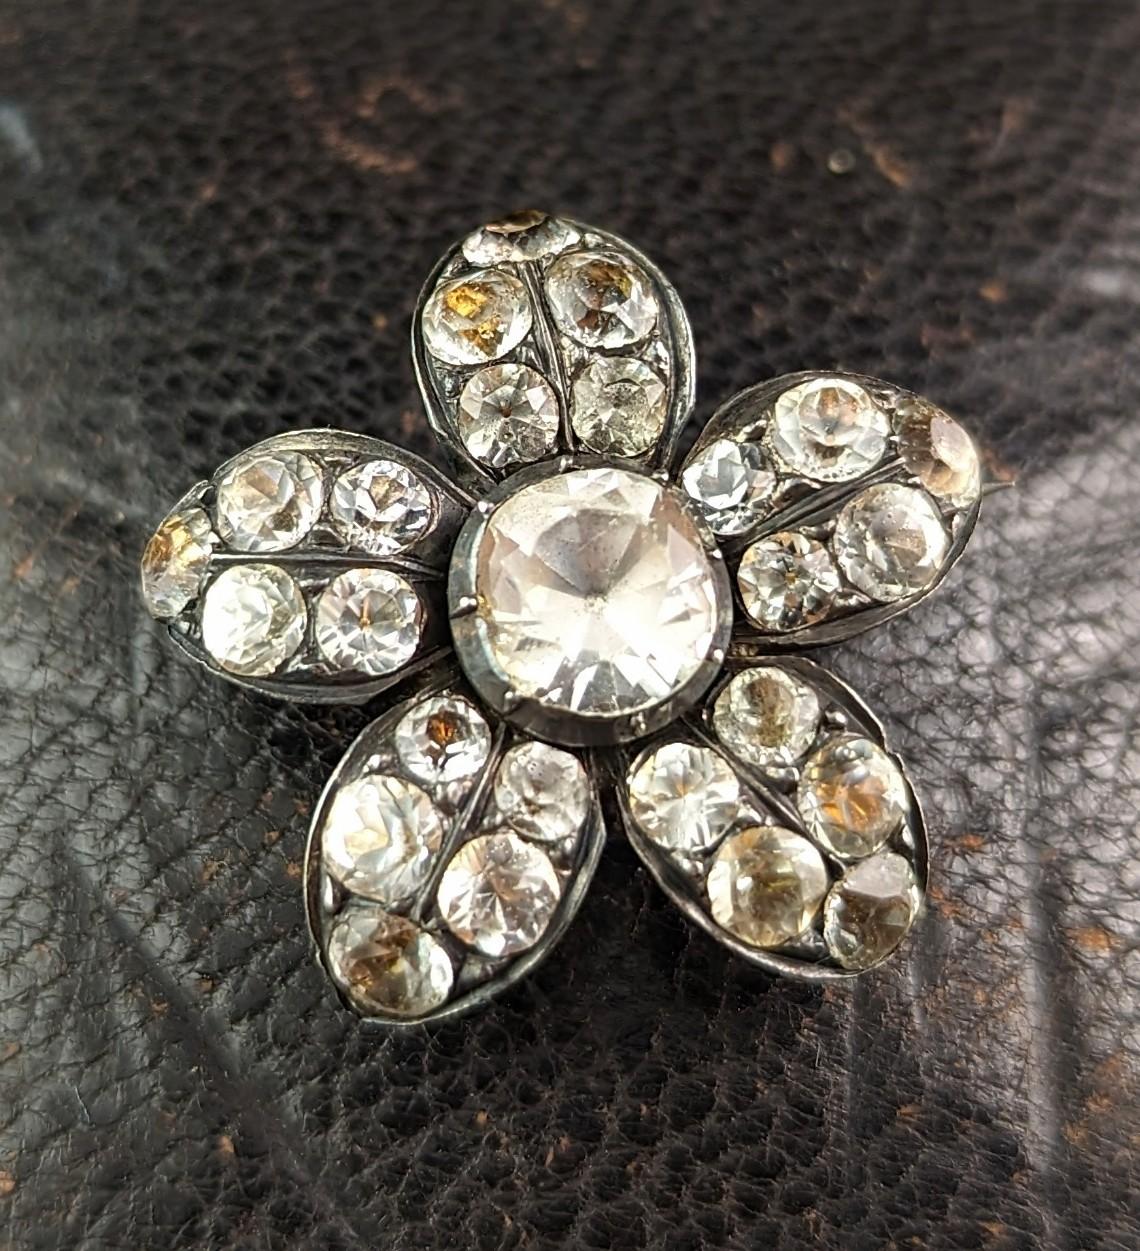 This antique Georgian foiled back paste lace pin is so unusual and alluring.

Made from sterling silver it is designed as a flower head and is set with sparkling clear paste stones.

This was most likely a lace or fichu pin based on its size, used